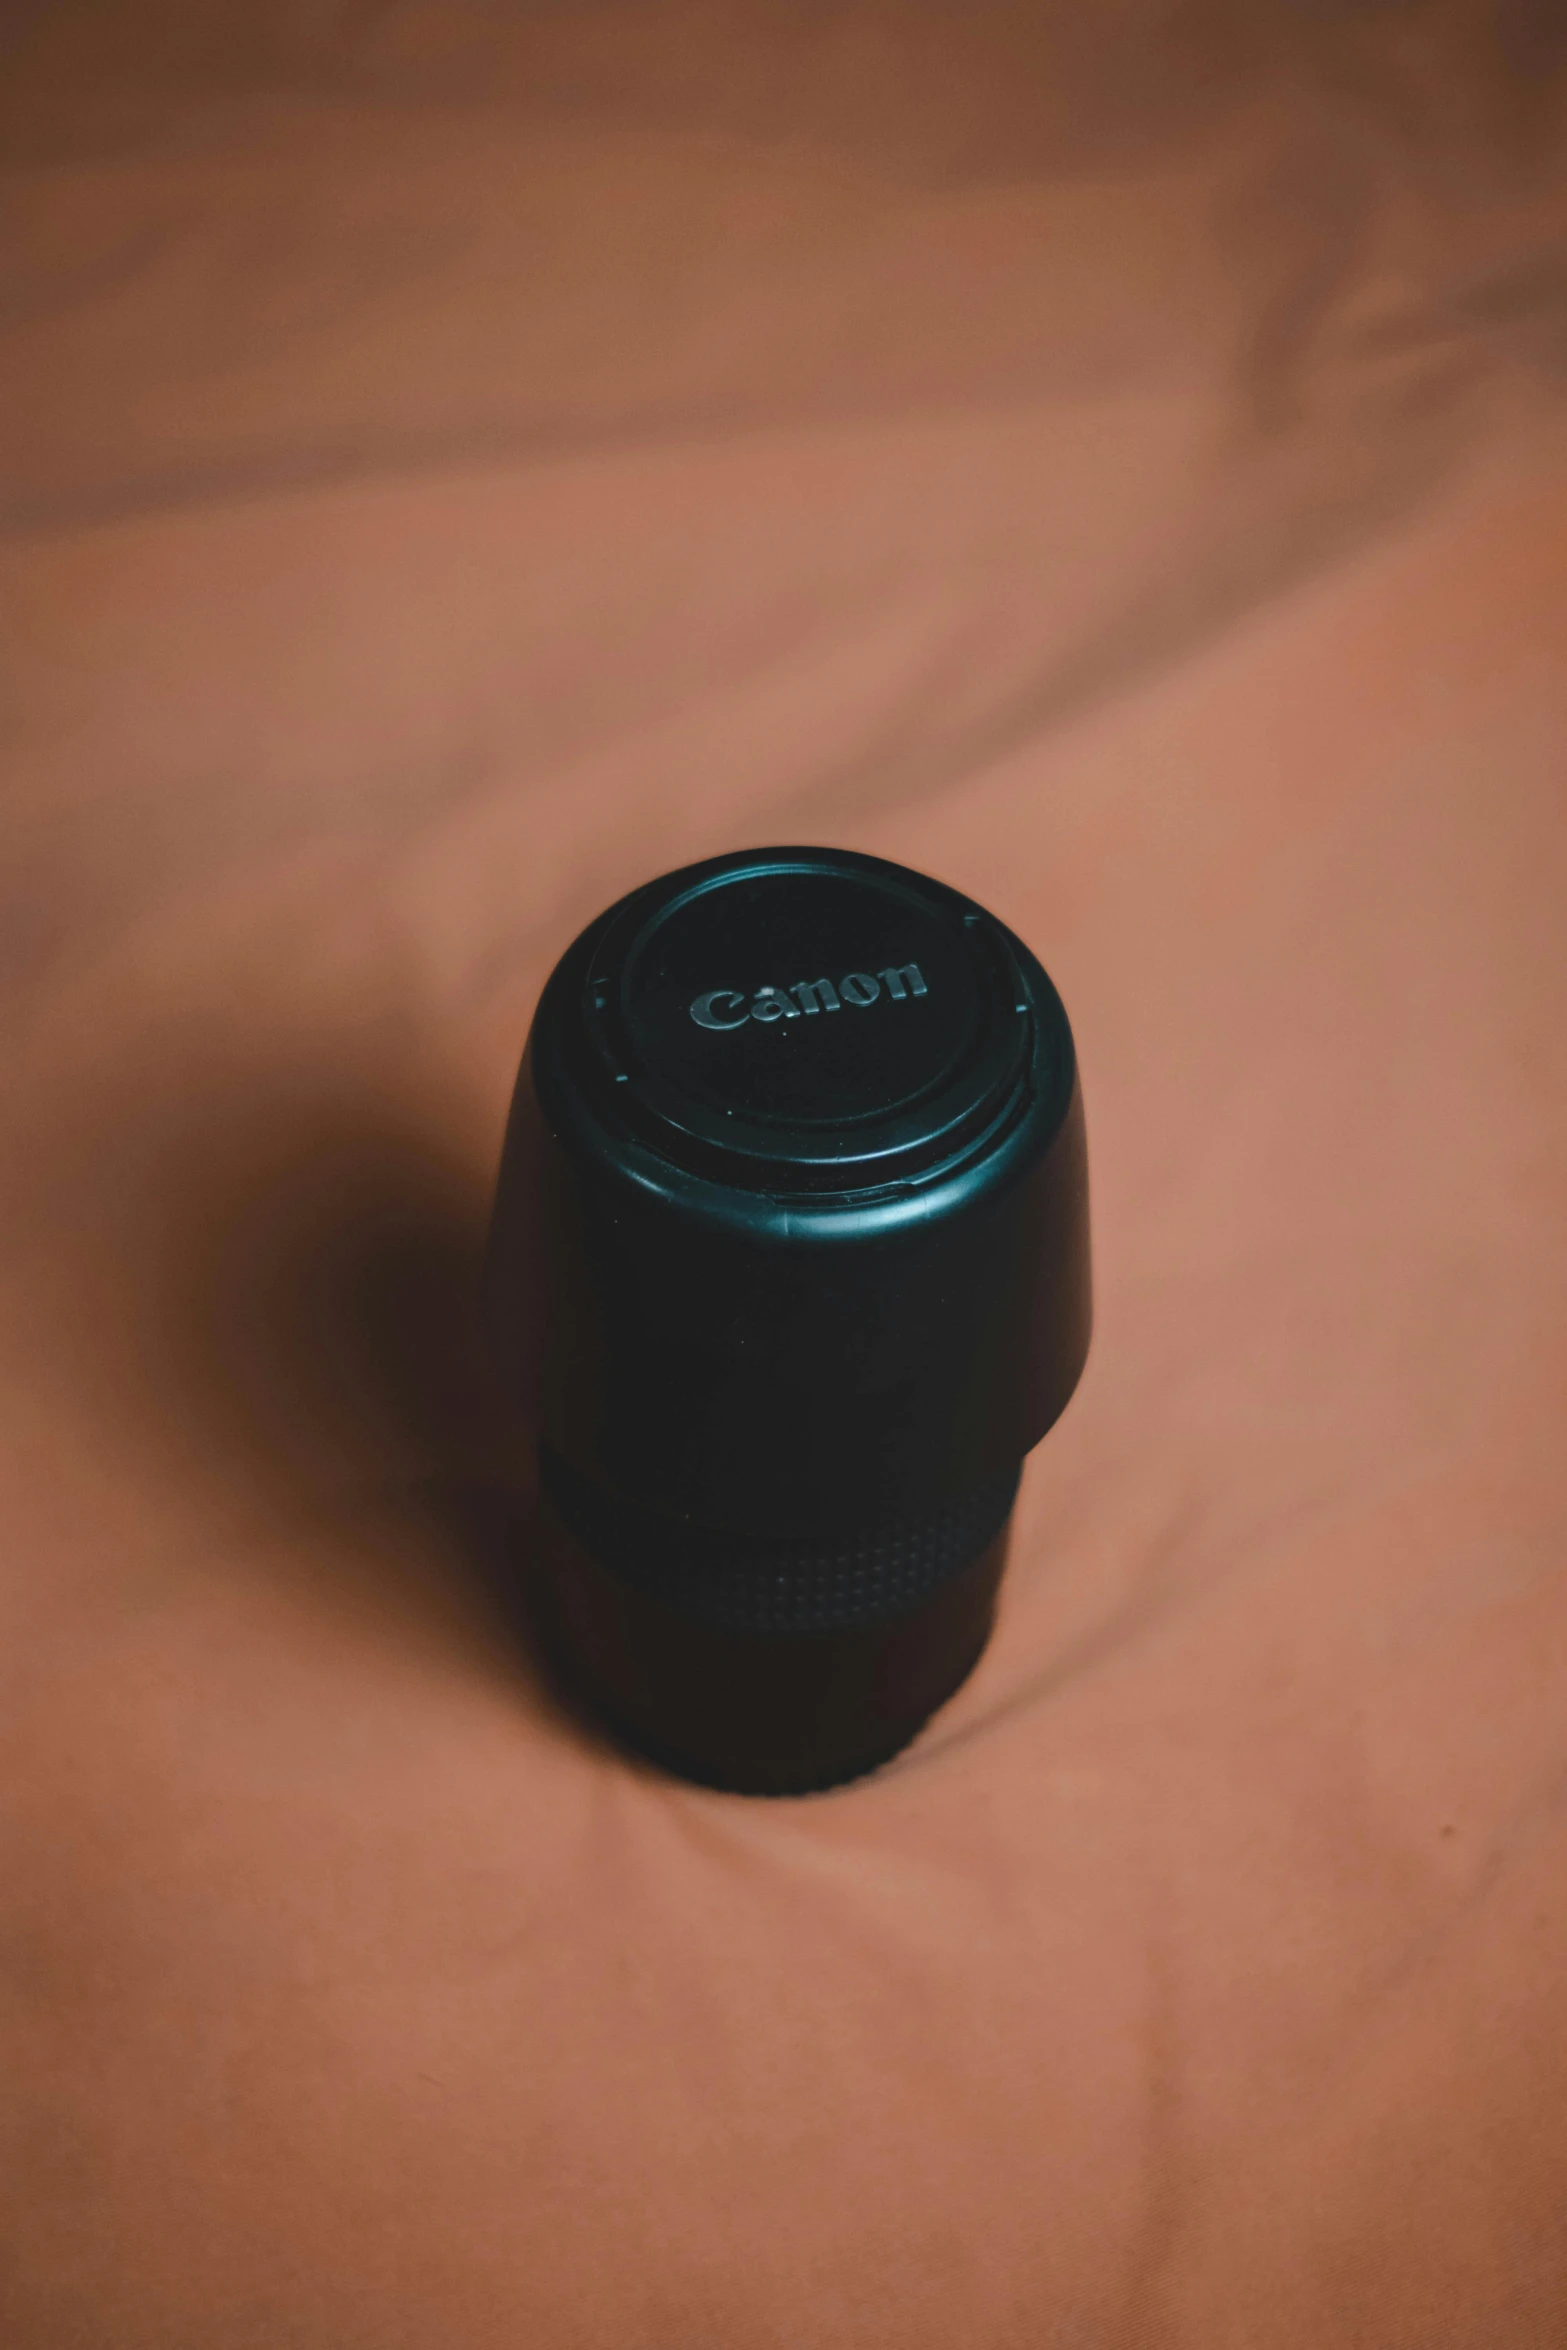 the lens cap on an camera set up on a bed